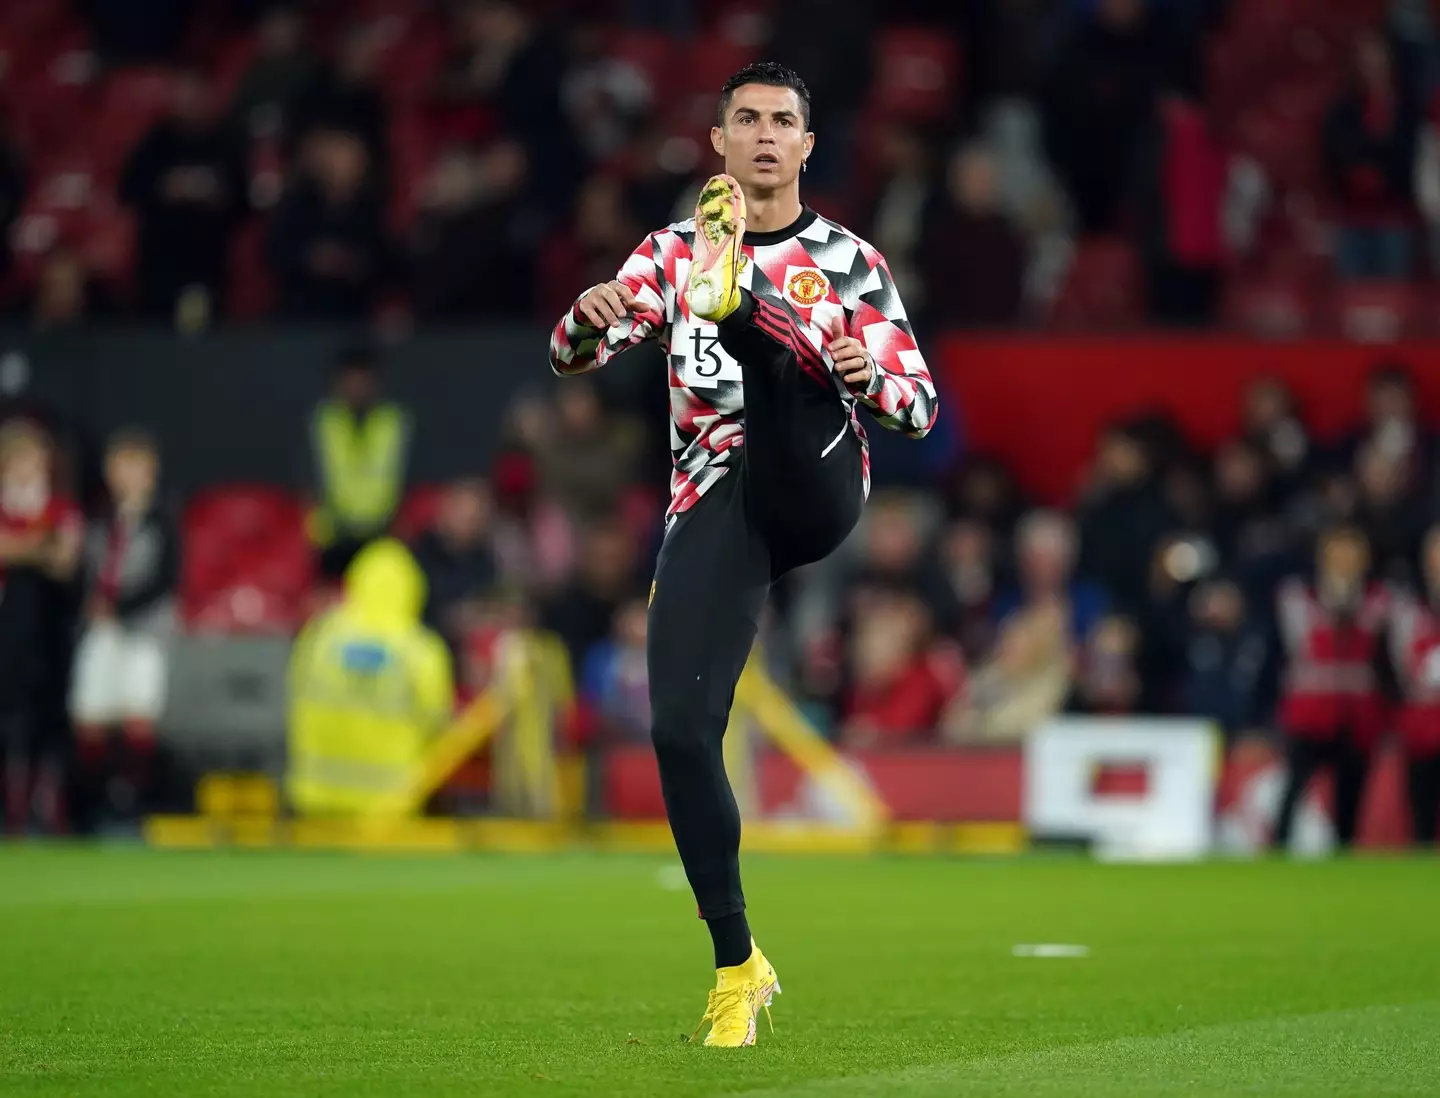 Cristiano Ronaldo warming up on the pitch before storming down the tunnel. Image: Alamy